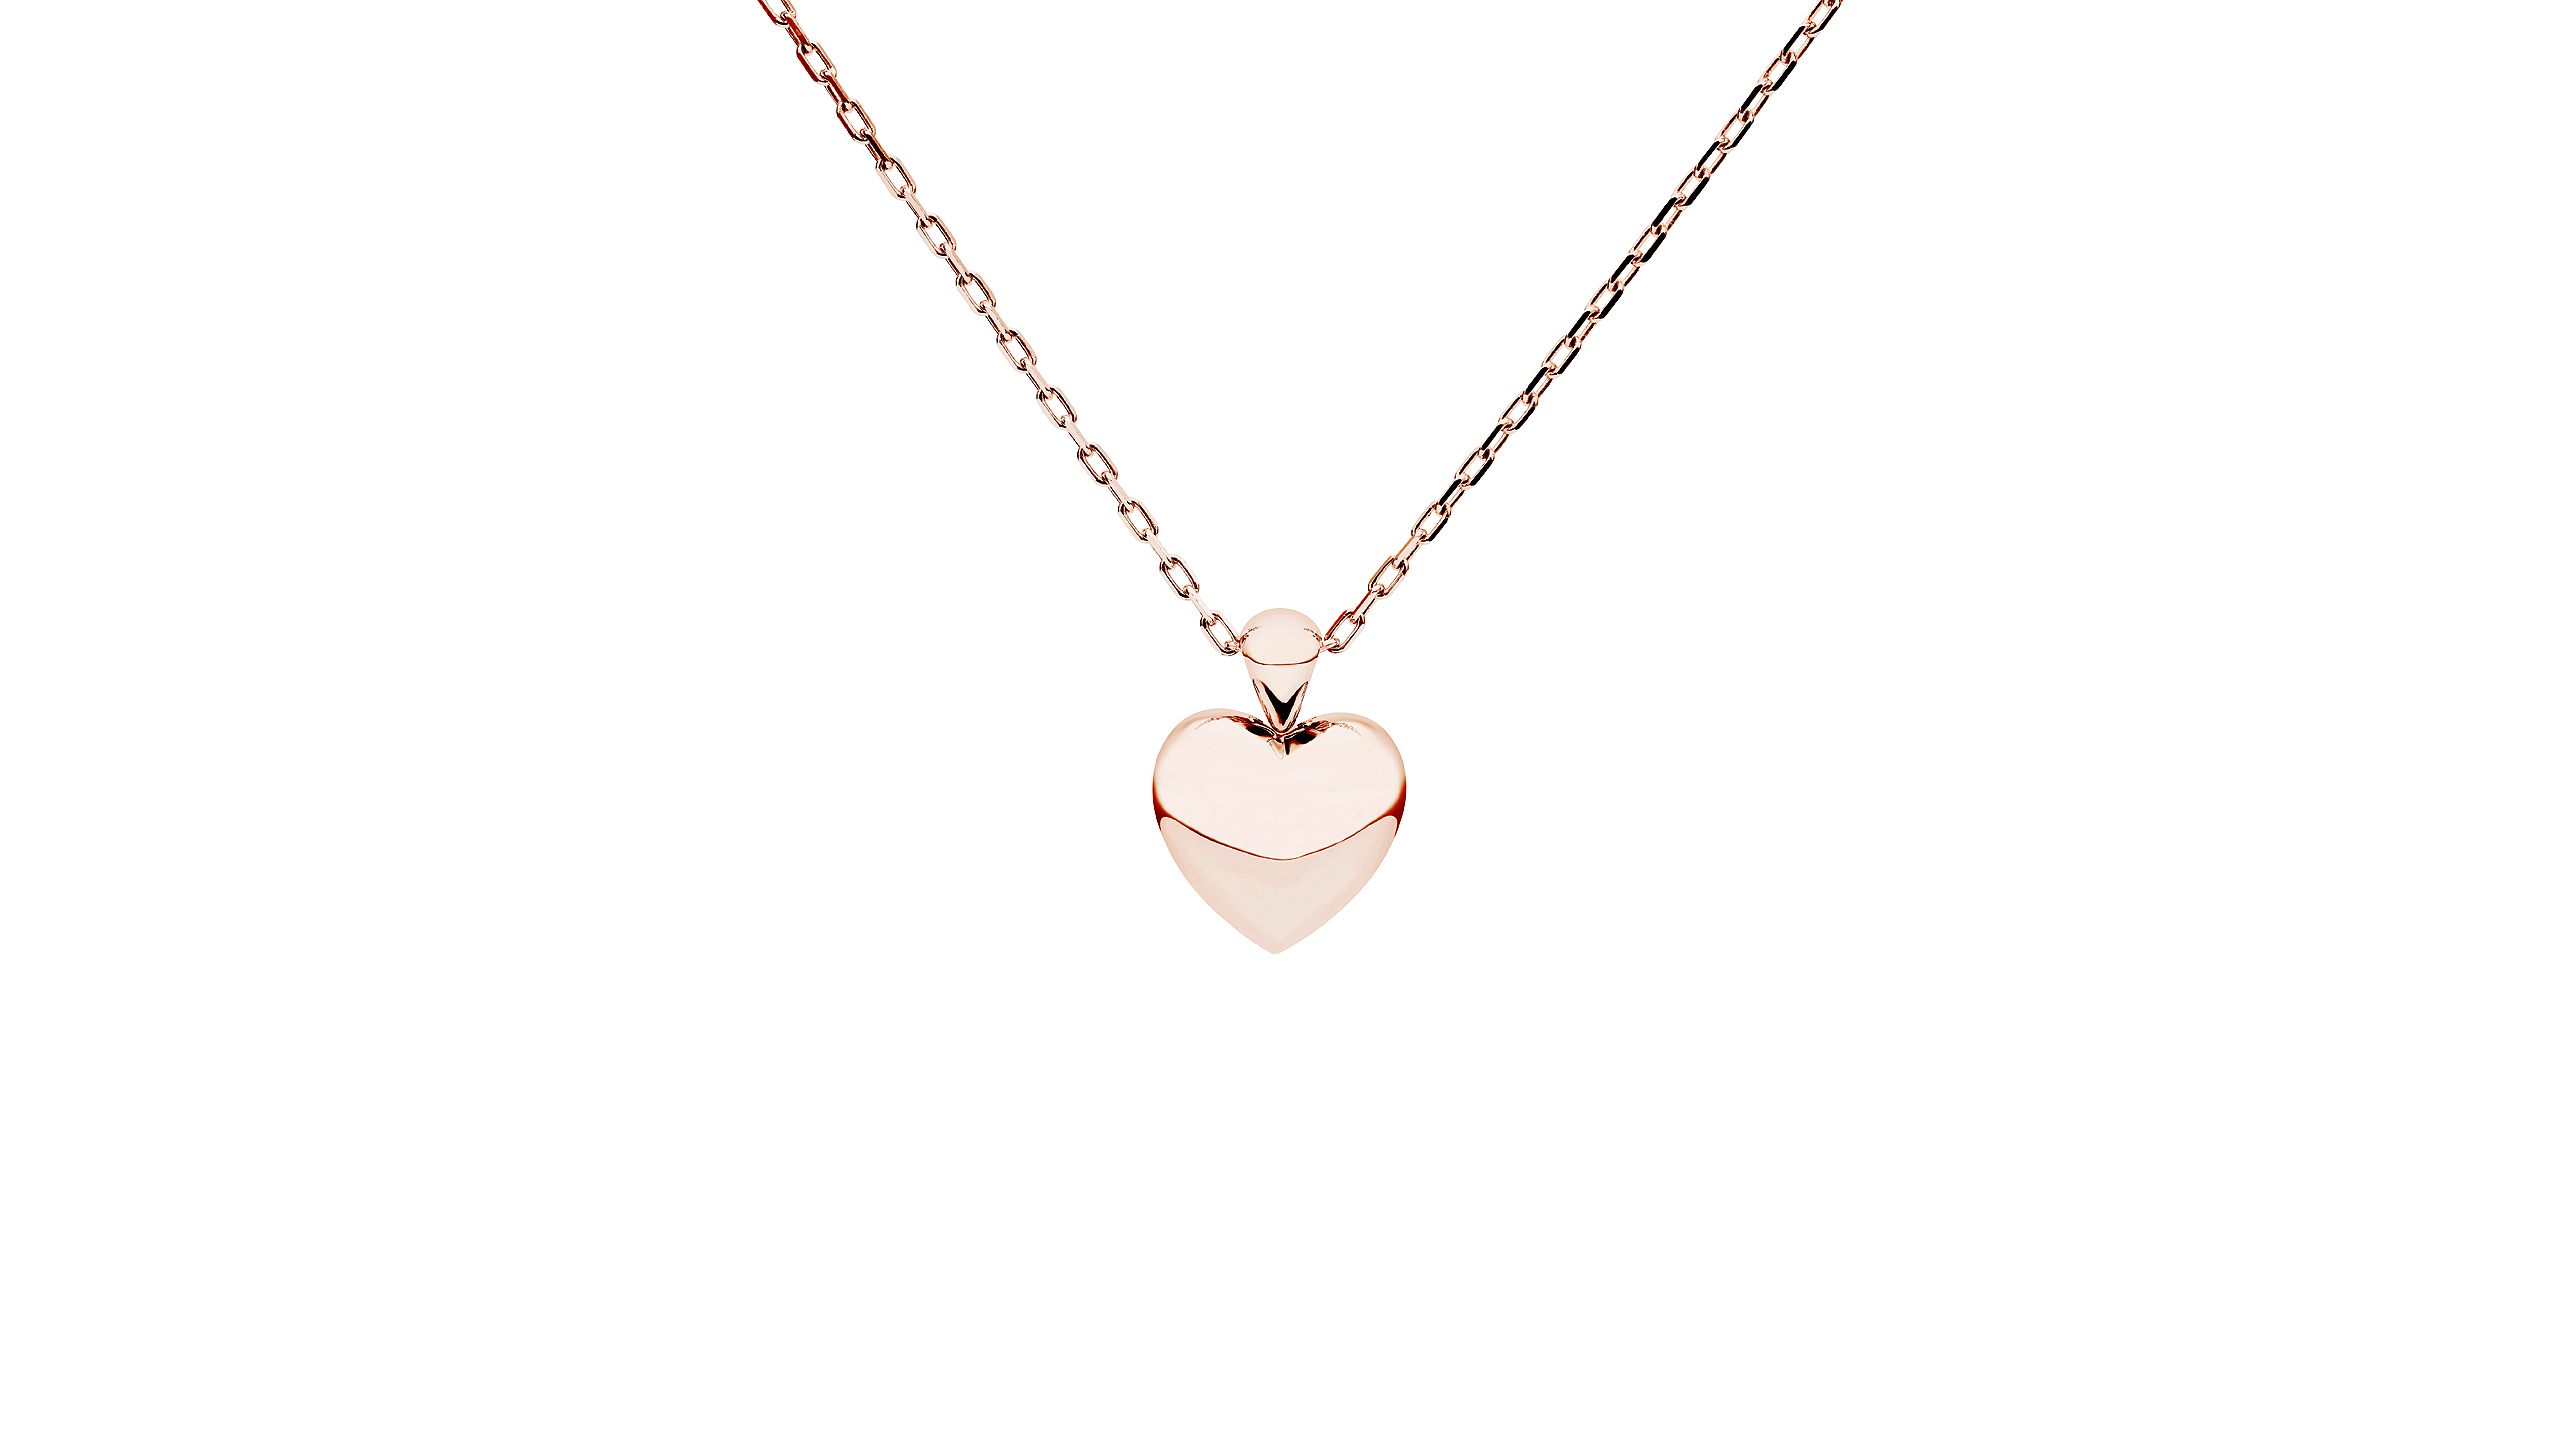 https://towejewels.com/wp-content/uploads/2013/10/TOWE_Y_gold_heart_Xsmall2015-10-19-12.34.09_pink_gold_AB_ver_mini_2560x1440_overview_web.jpg